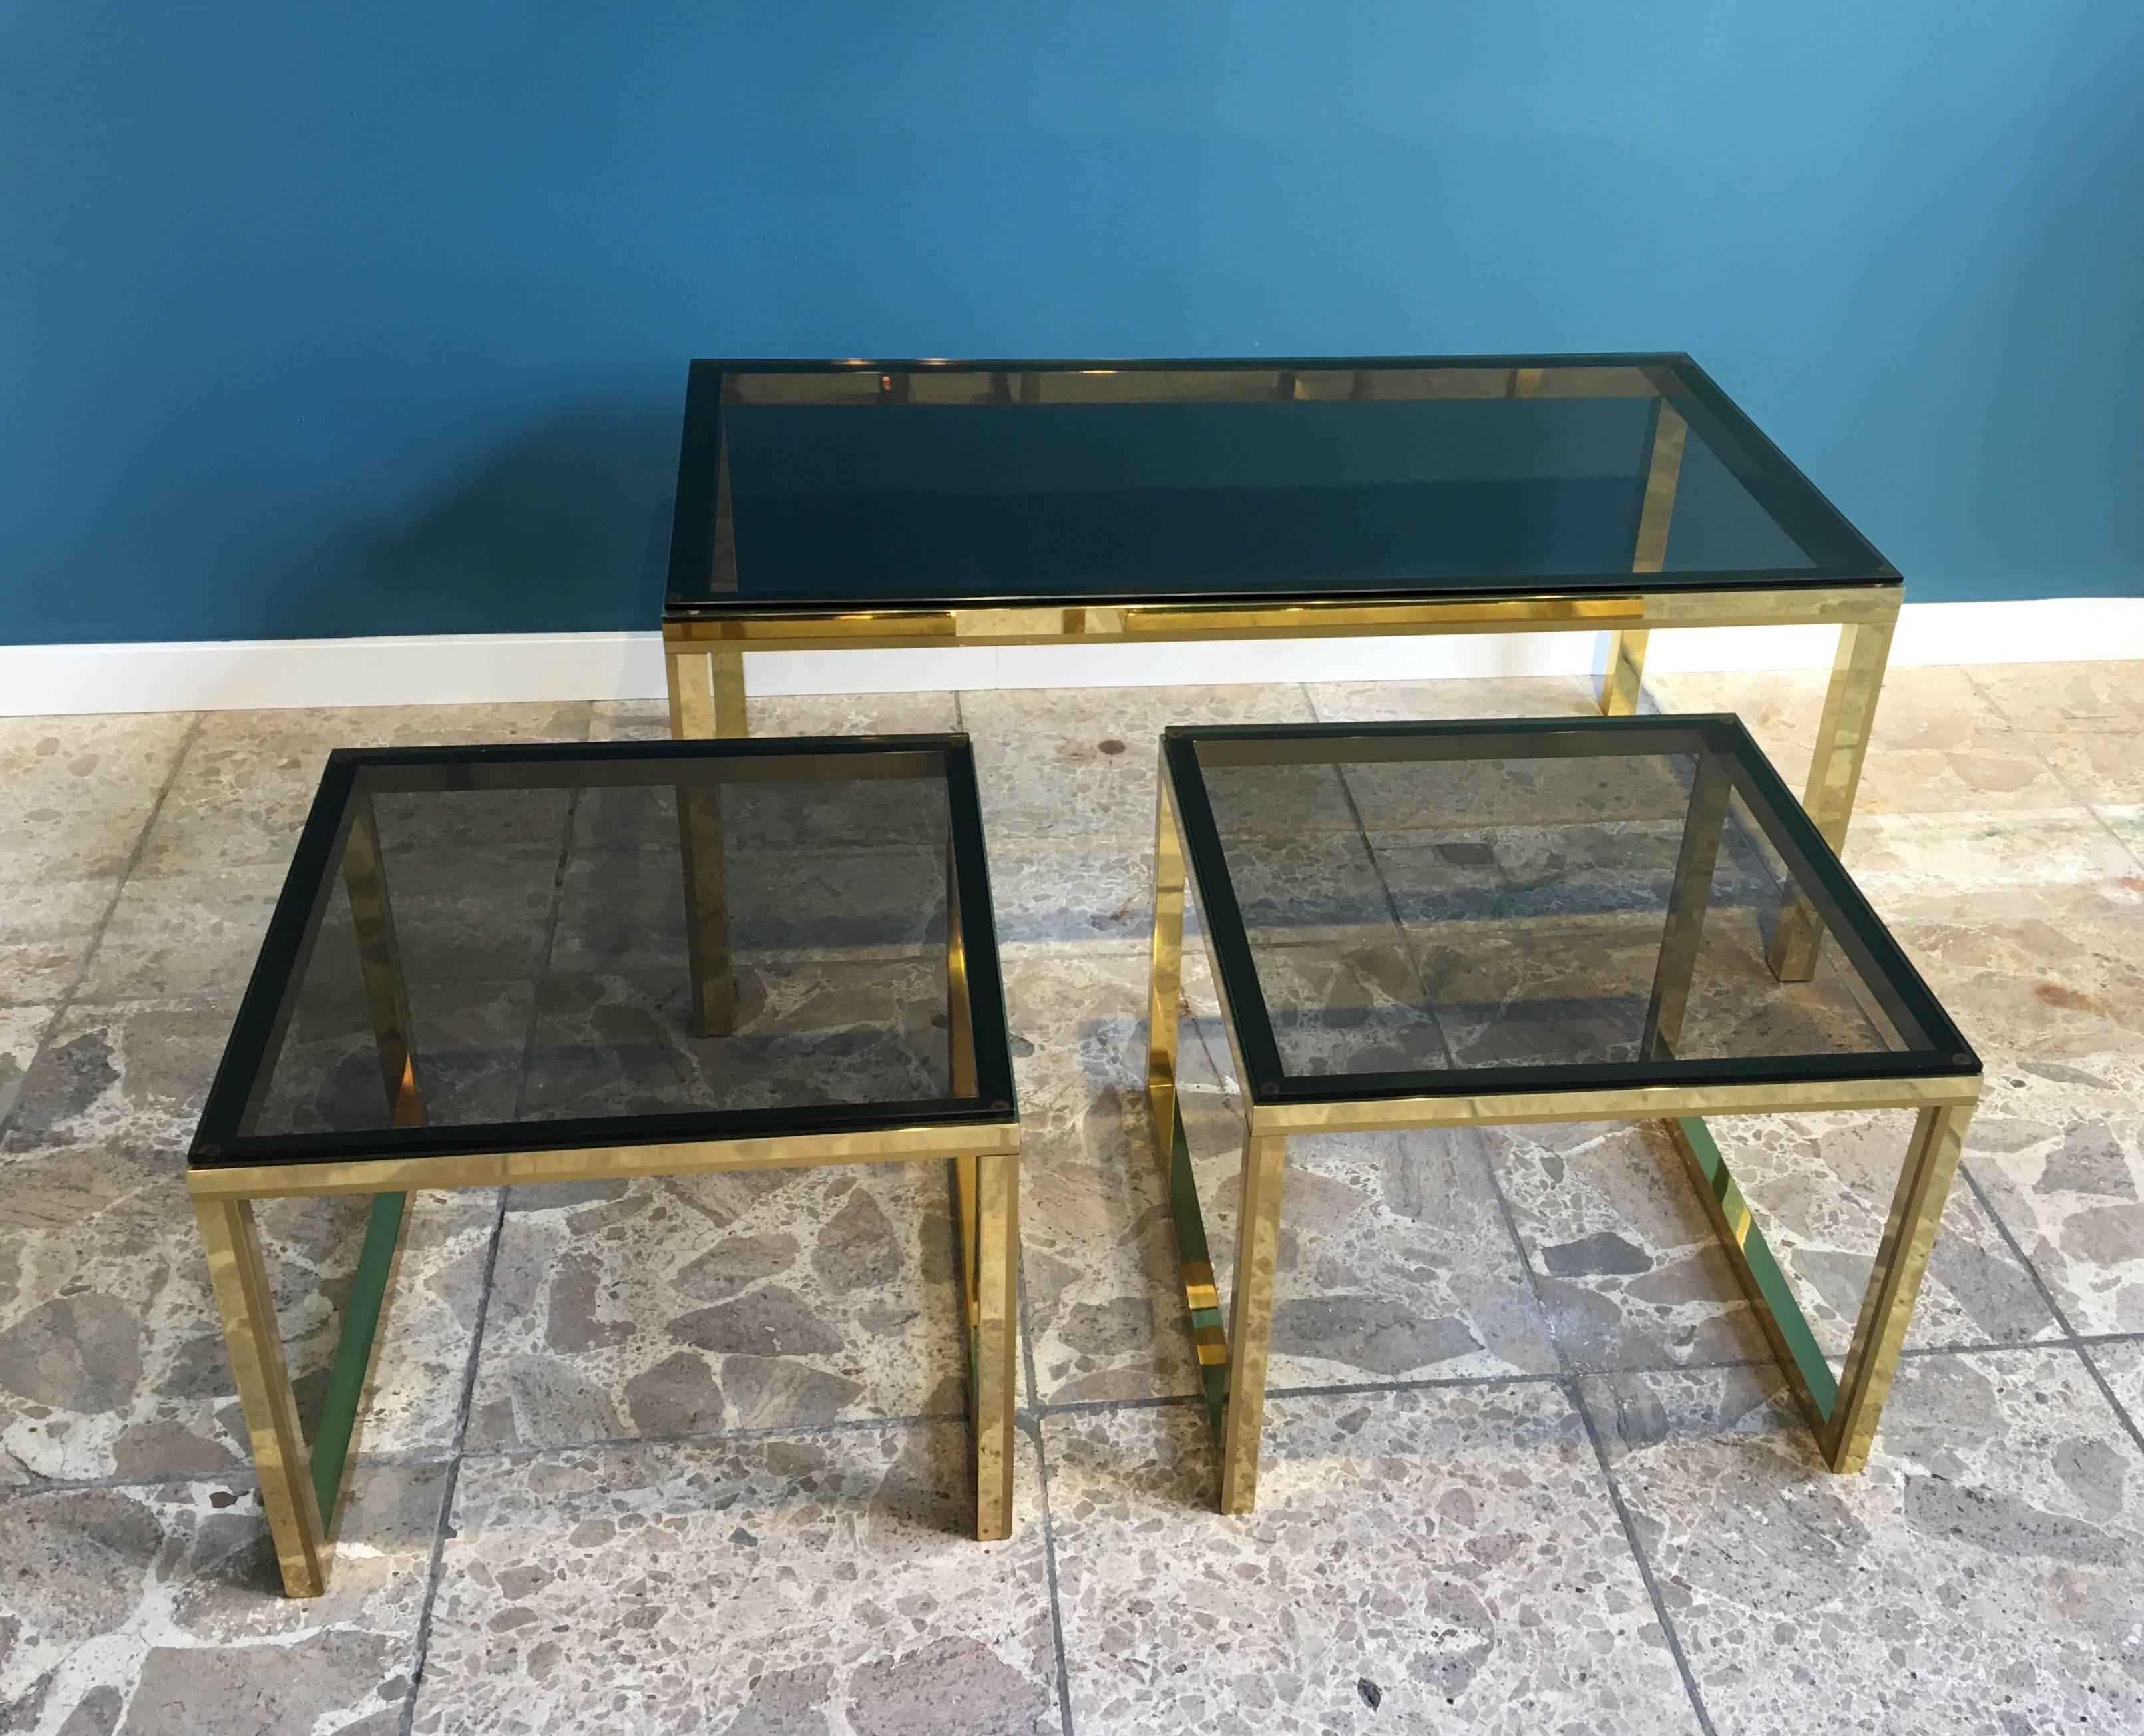 This set consists of three tables. Each features a frame made of brass and a top made of smoked glass. The tables appear to be made in the 1970s or 1980s in Europe. The large rectangular table measures 110 cm width and 45 cm. The two square tables